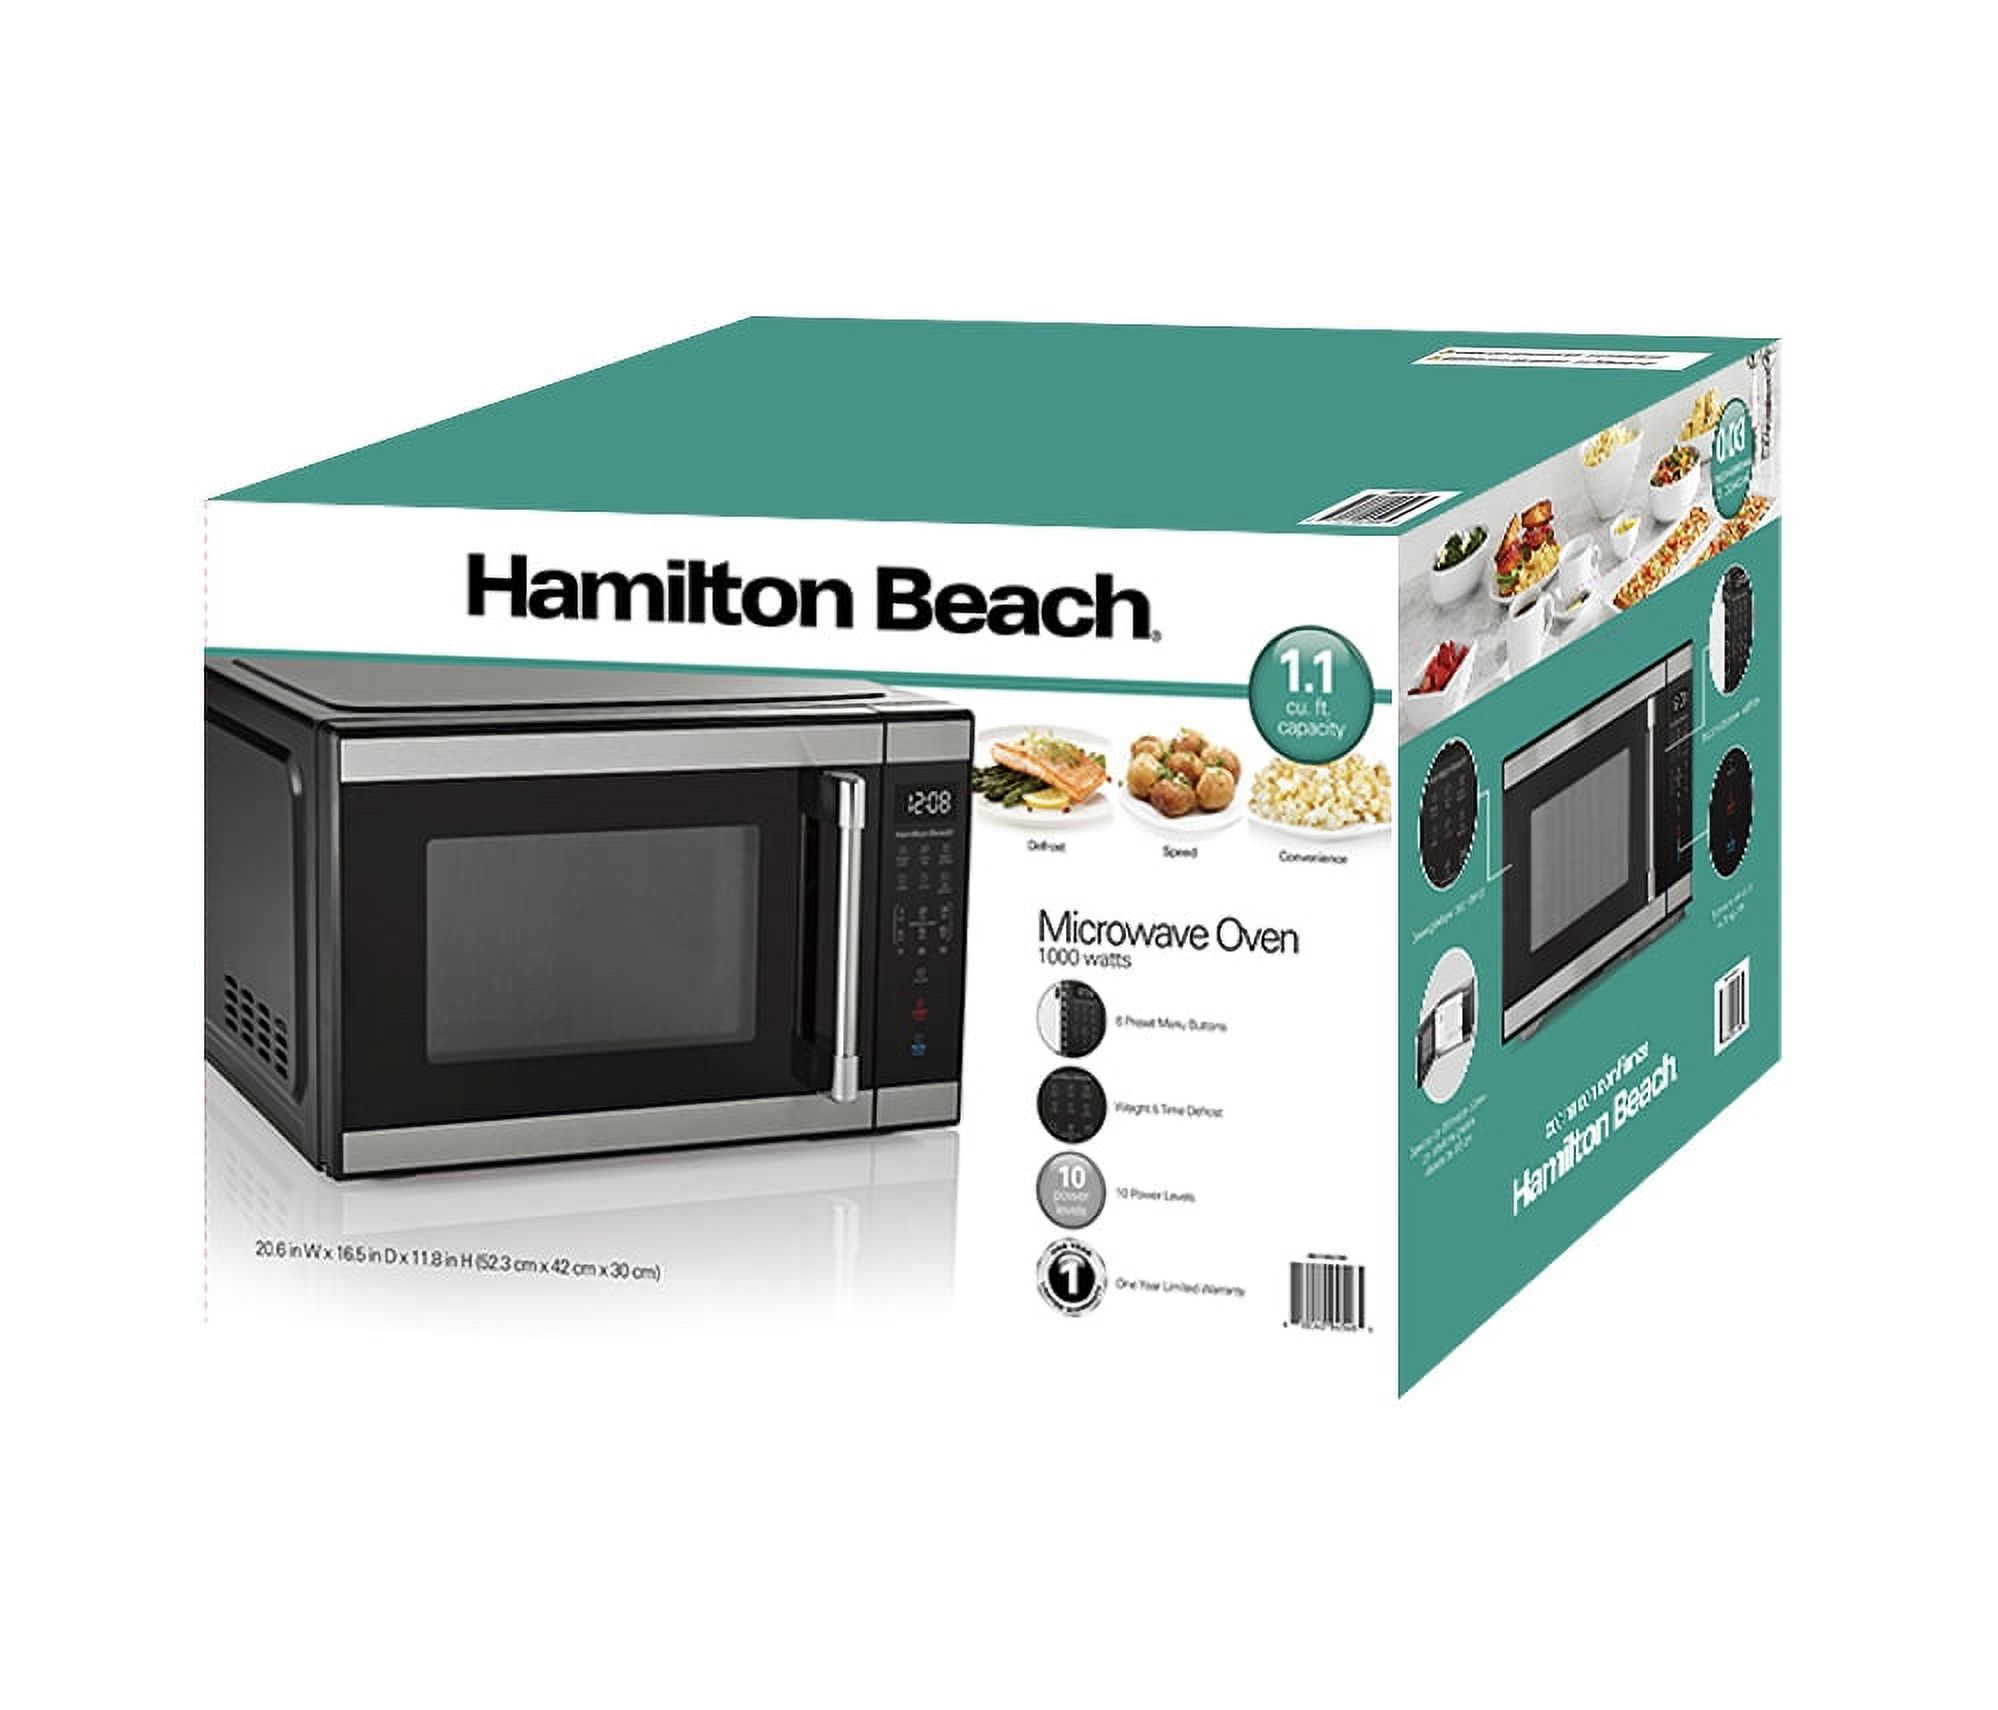 Hamilton Beach 1.1 cu ft Countertop Microwave Oven in Stainless Steel - image 3 of 8